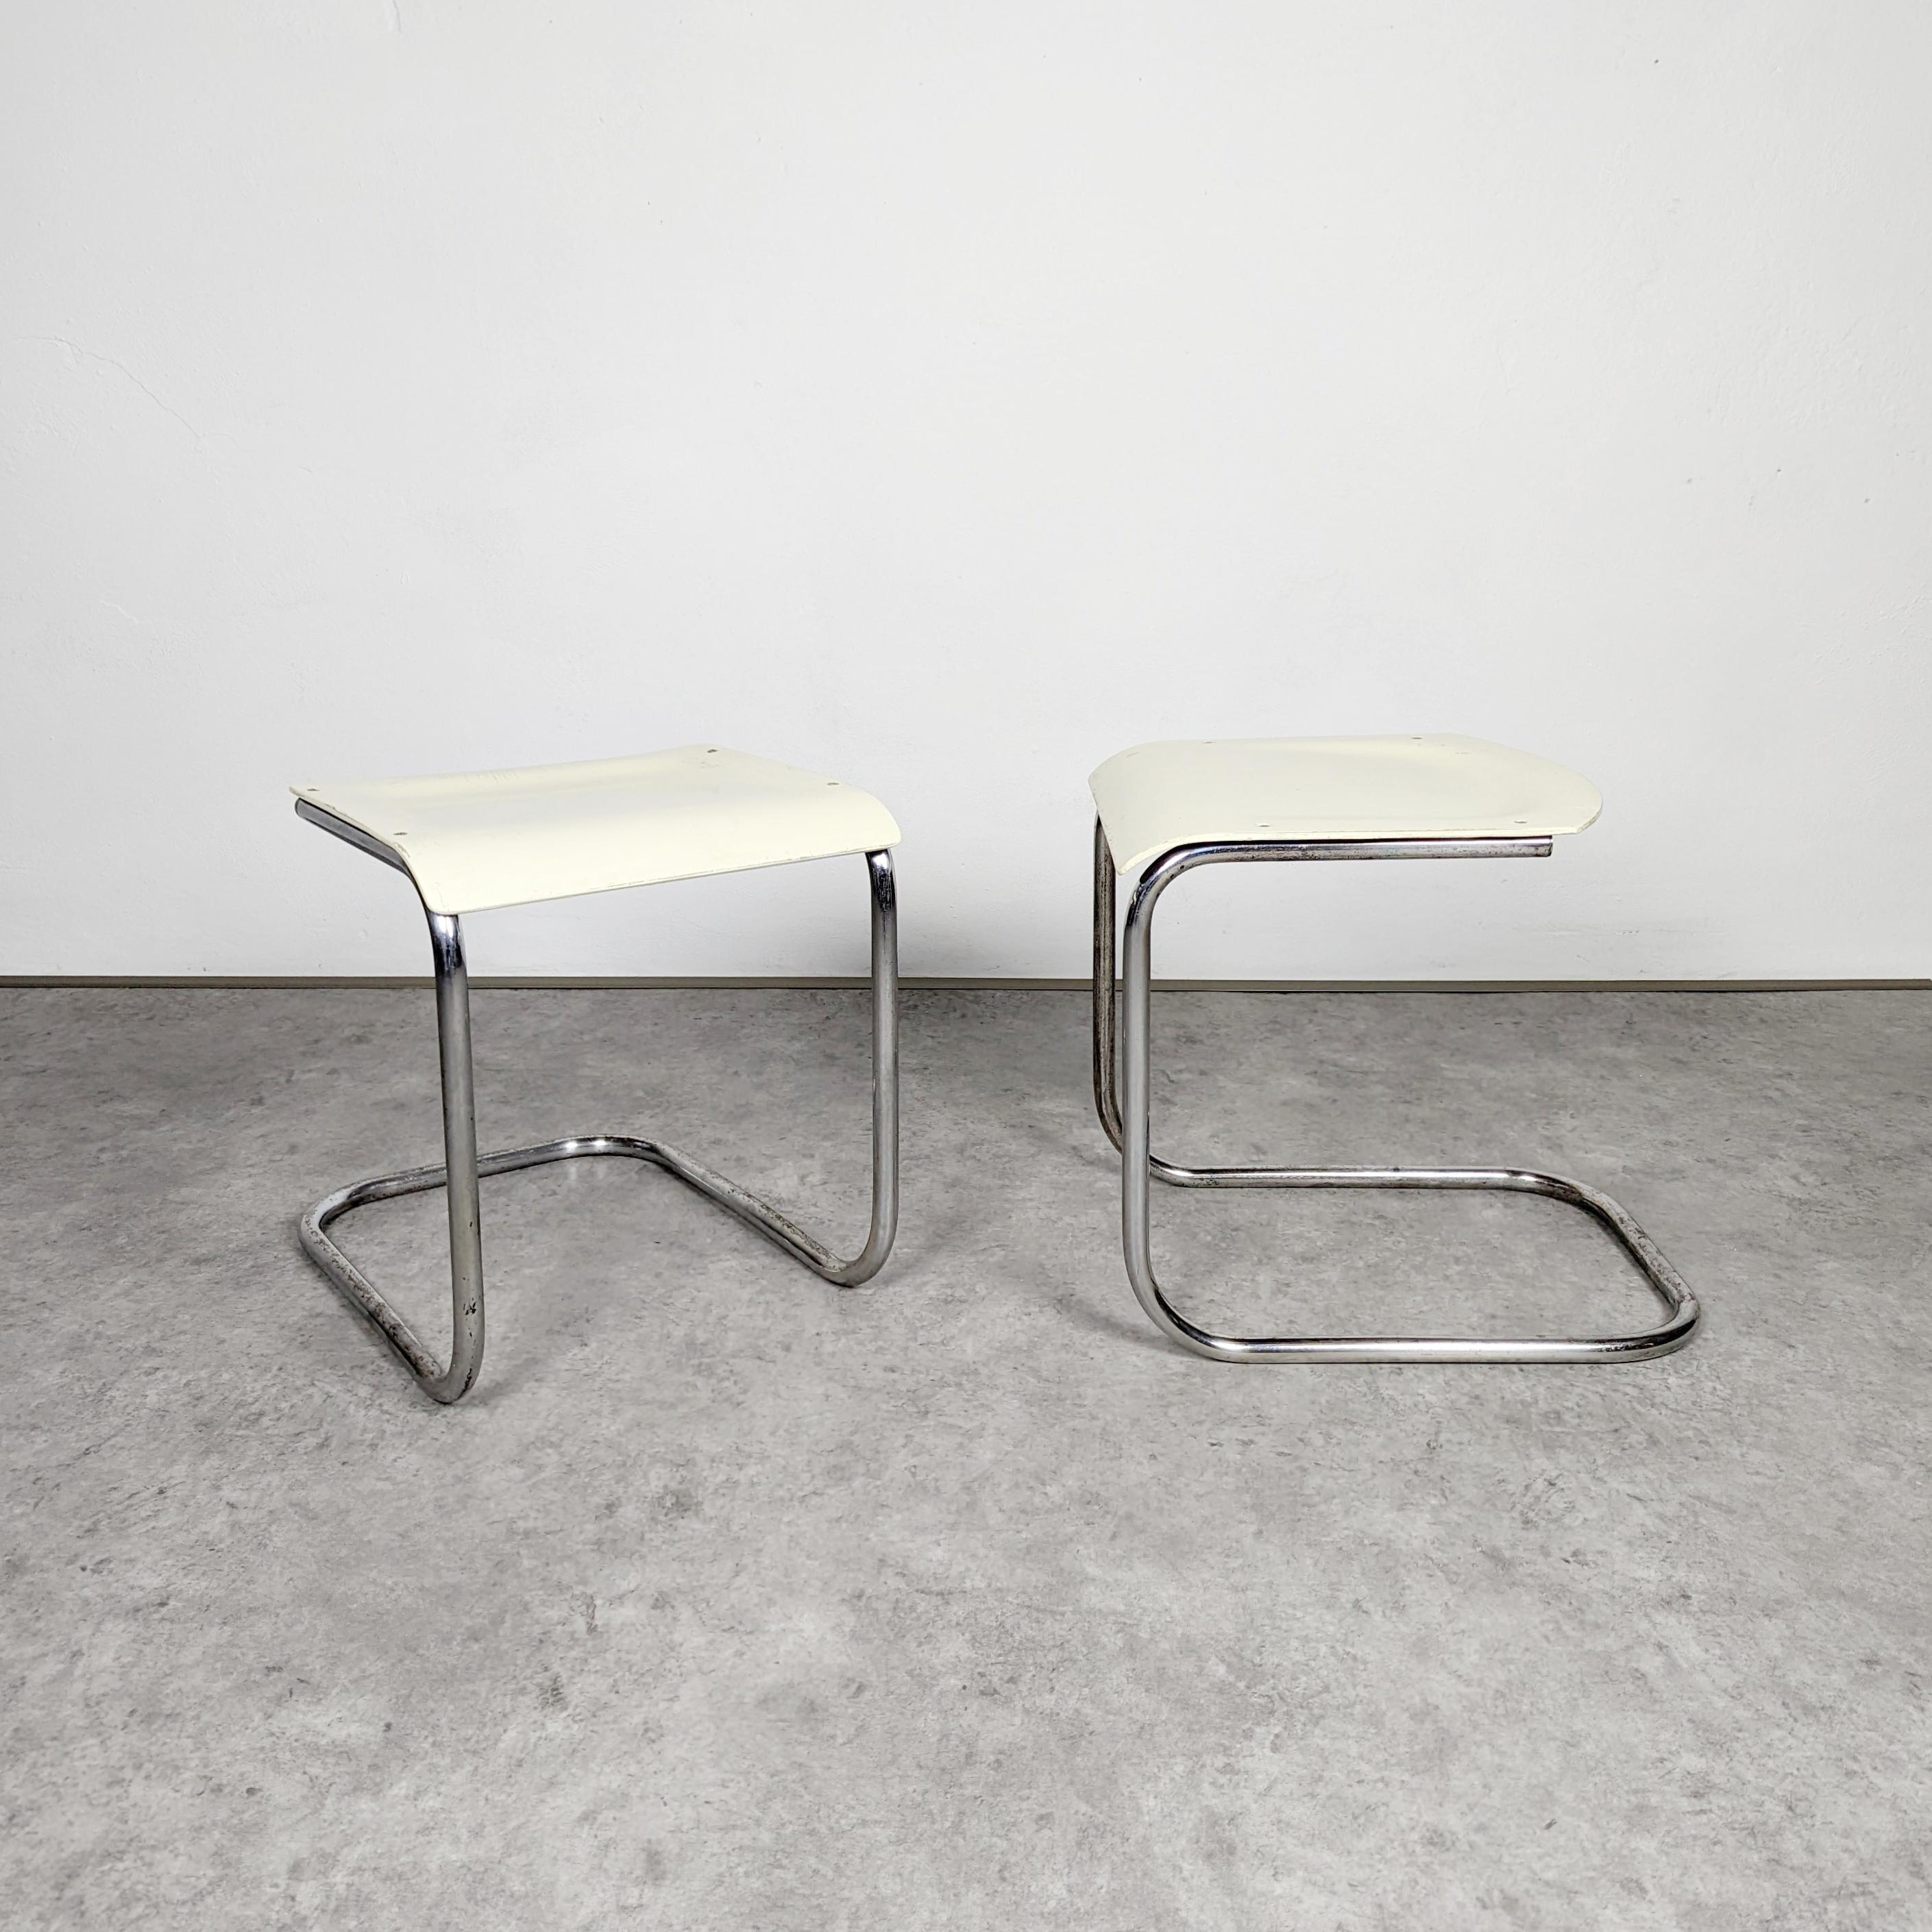 Pair of original cantilever tubular steel hockers designed by Dutch architect Mart Stam in 1920's. This pieces were manufactured under Thonet license by Mücke & Melder company, former Czechoslovakia in early 1930's. Cream white lacquered plywood and